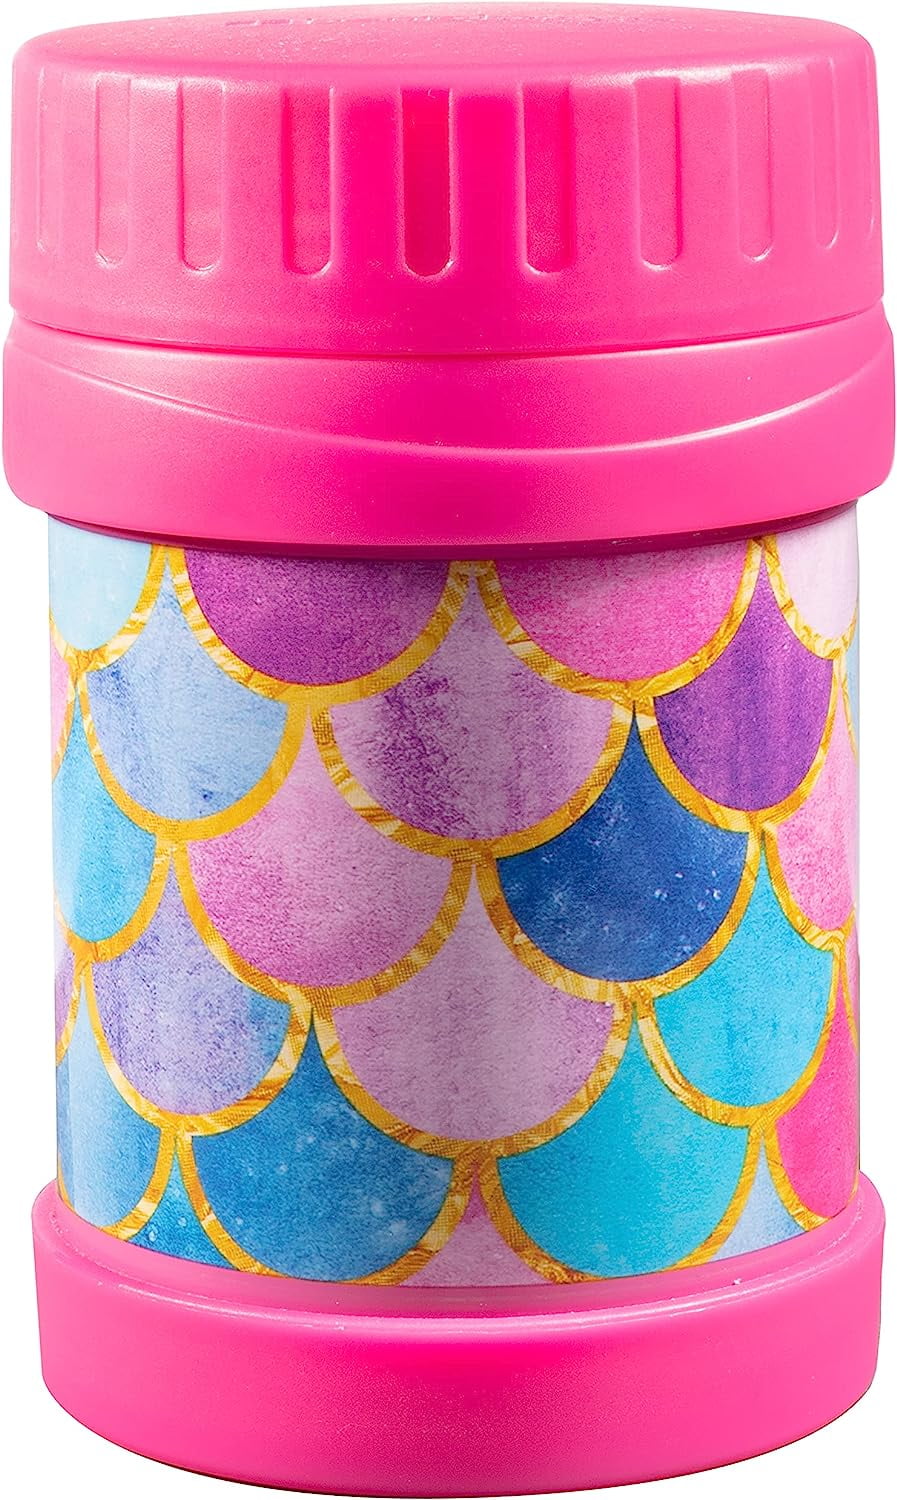 Thermos Kids' Soft Lunch Kit/Insulated Lunch Box,Mermaid,2021